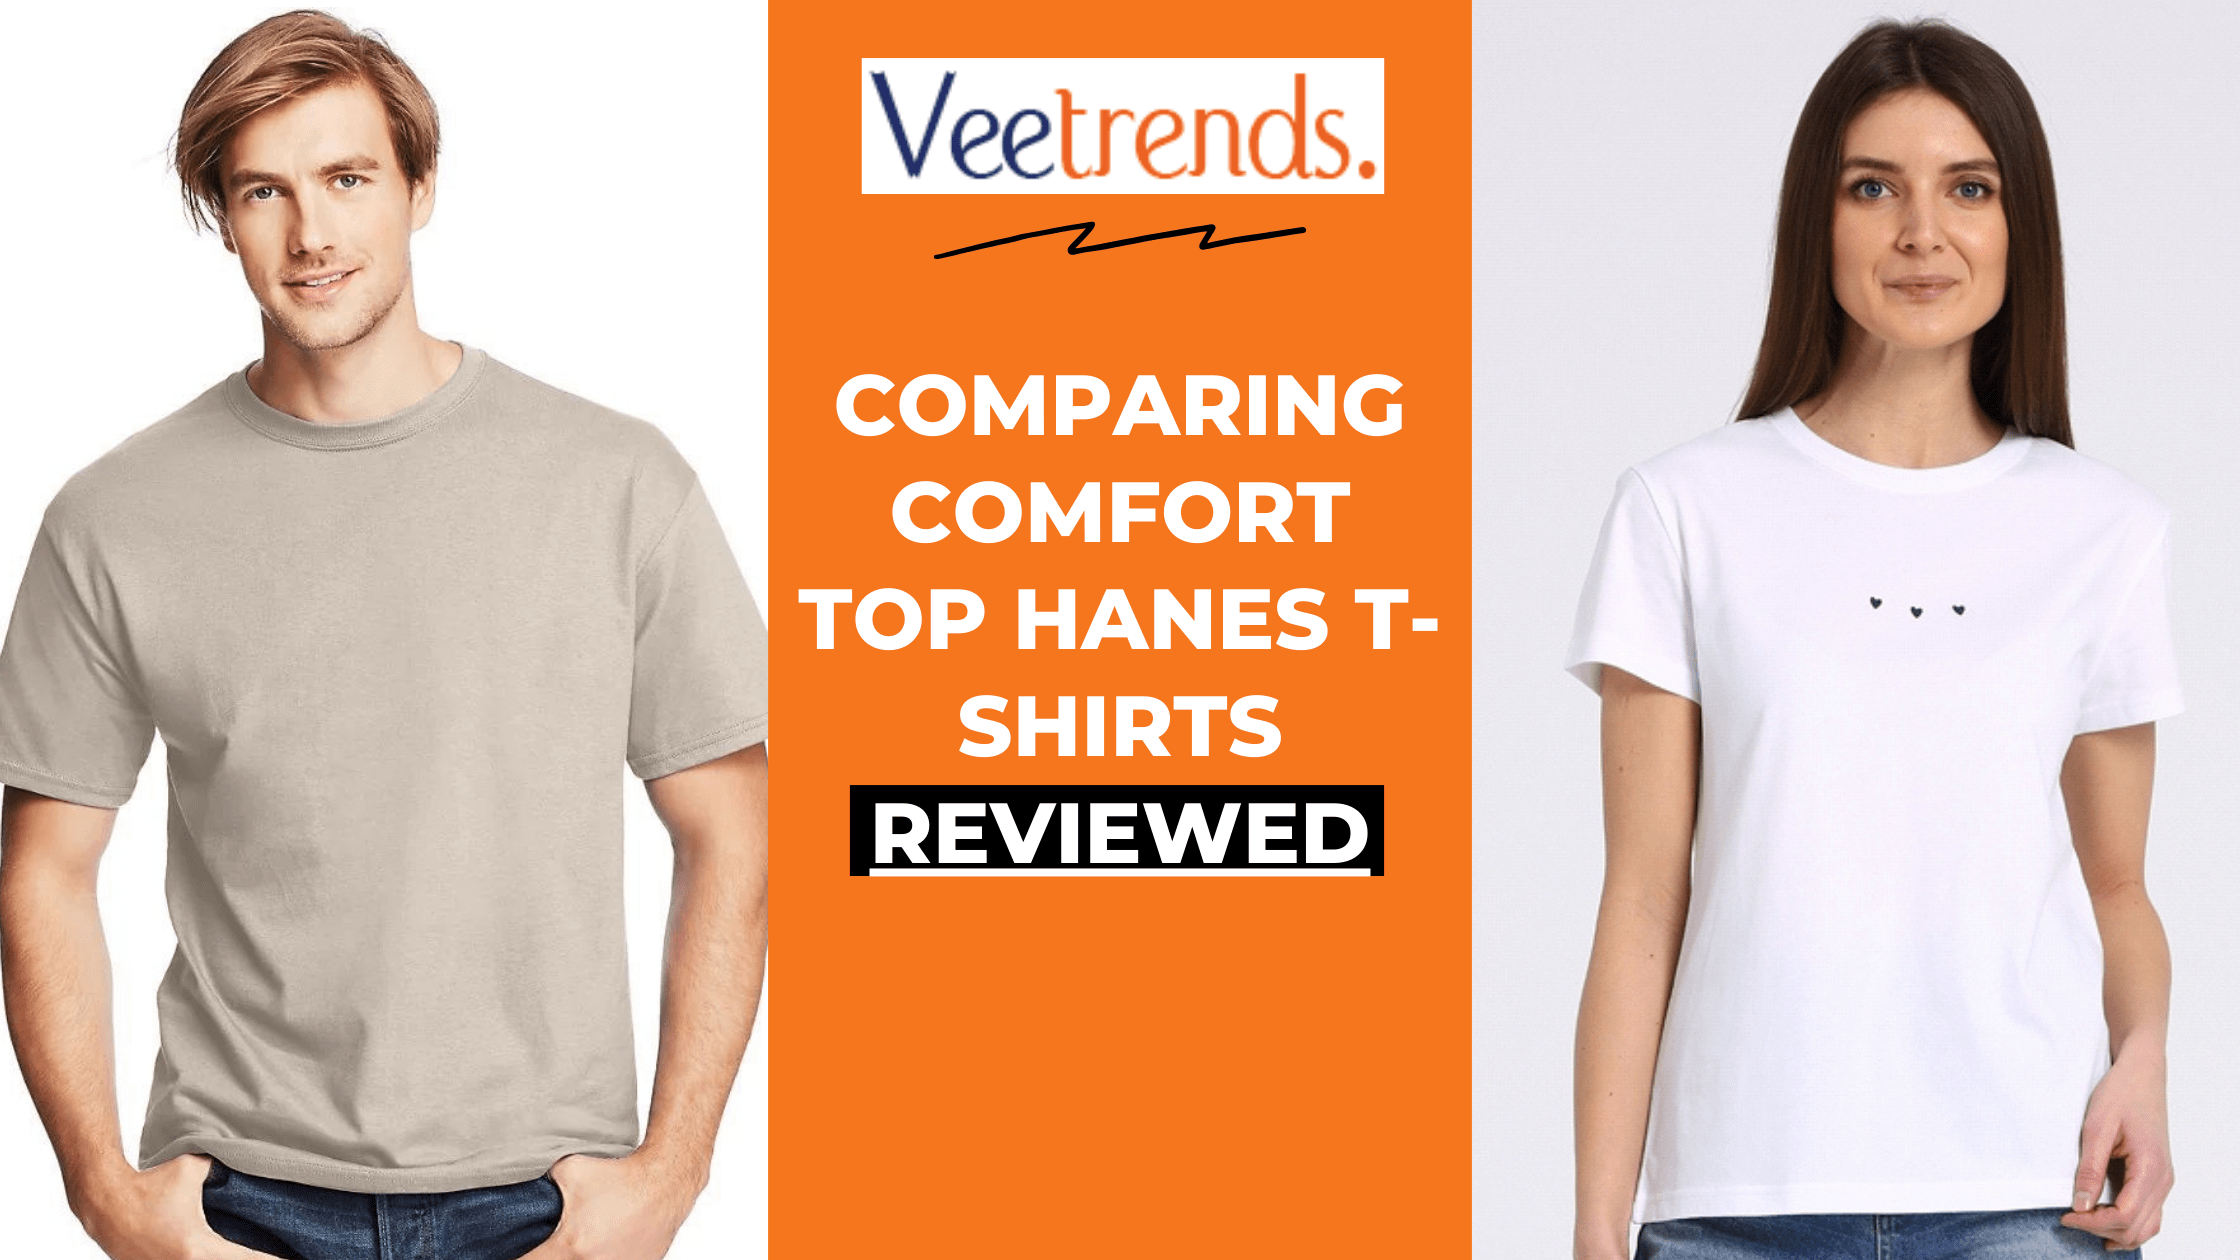 Comparing Comfort: Top Hanes T-Shirts Reviewed